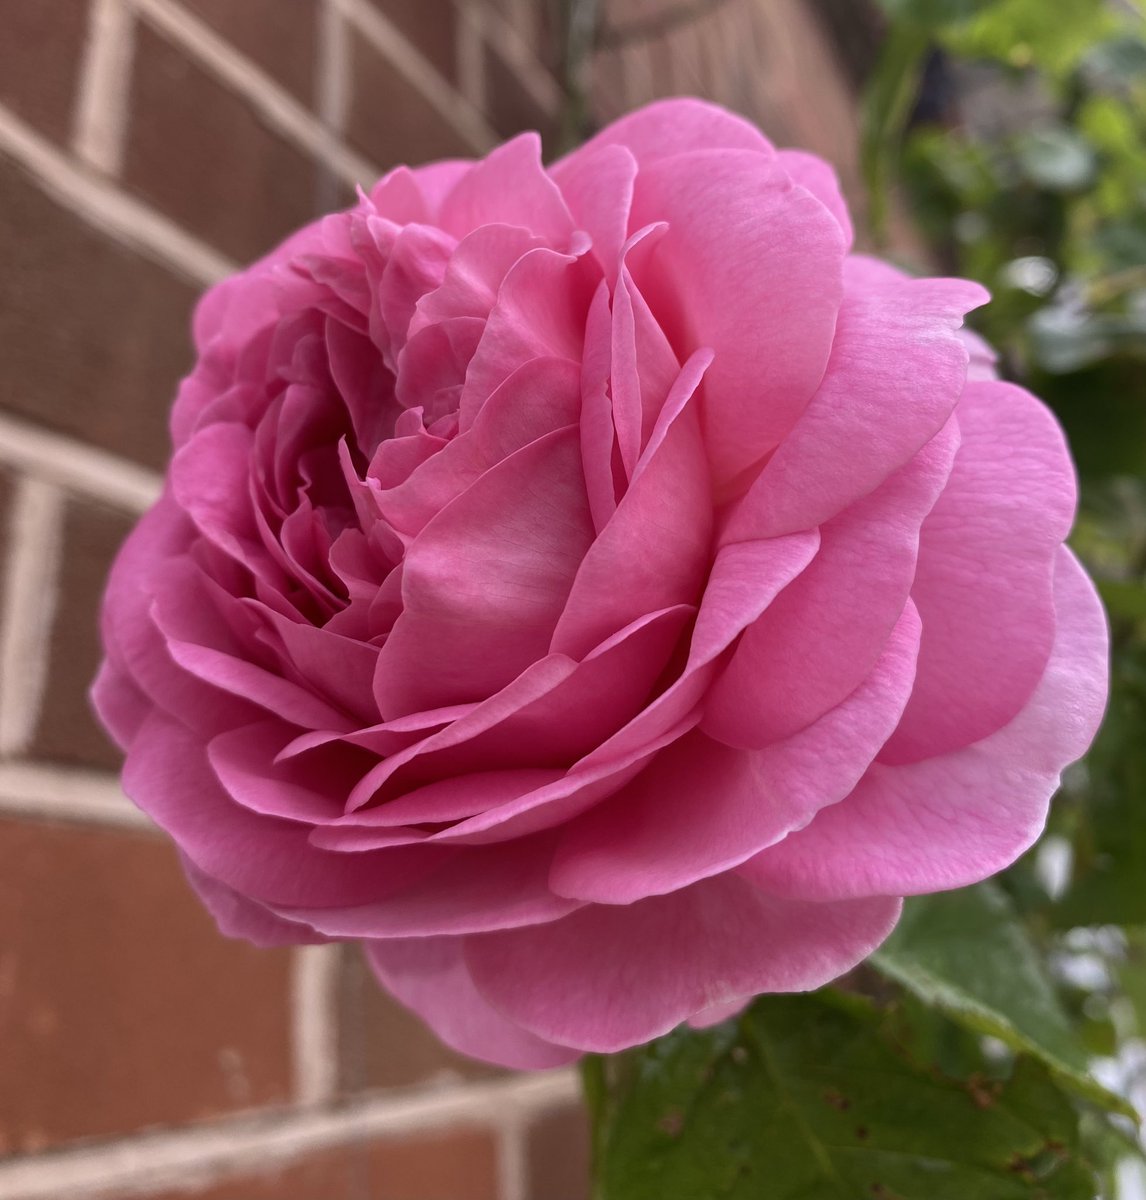 Well there’s a lovely surprise. Welcome Constance Spry 🥰 
#GardeningX #Roses #RoseADay #GardeningTwitter #sundayvibes